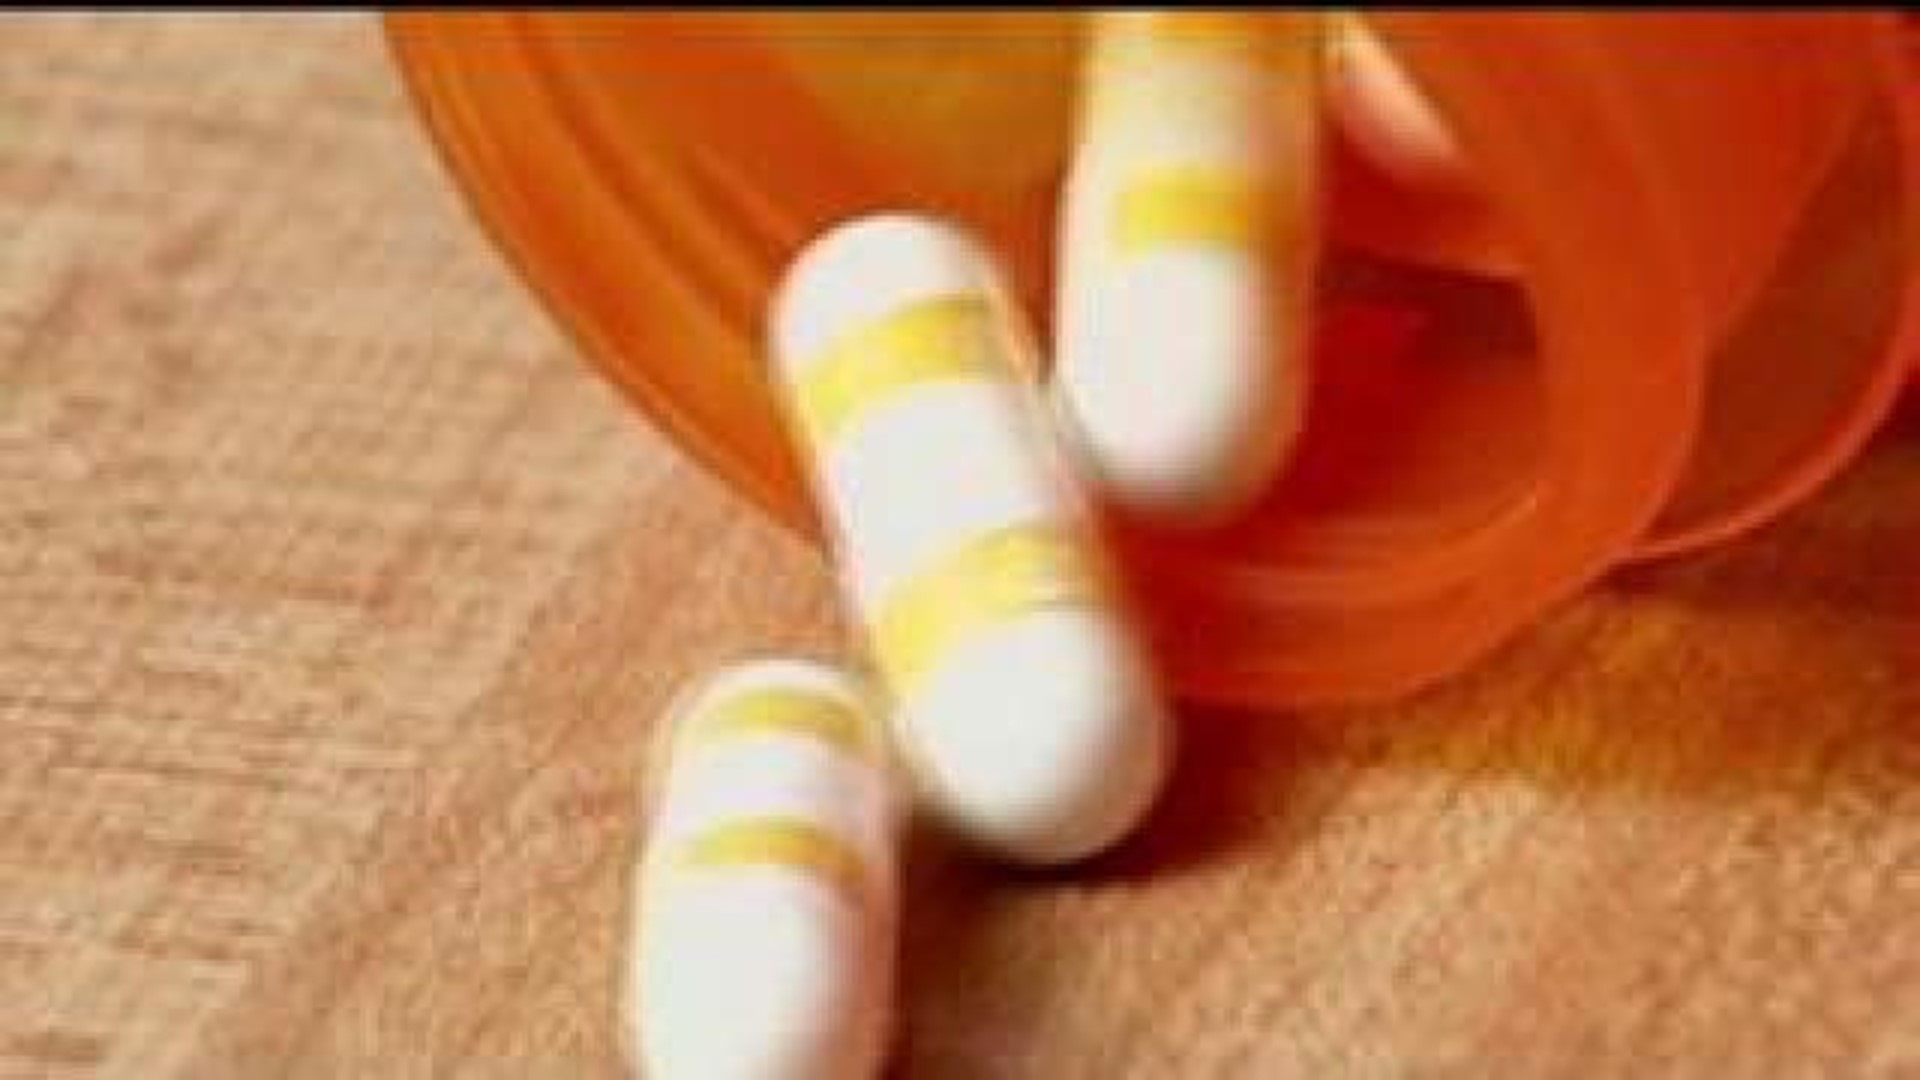 Women\'s Choice Center offering treatment to attempt to reverse abortion pill